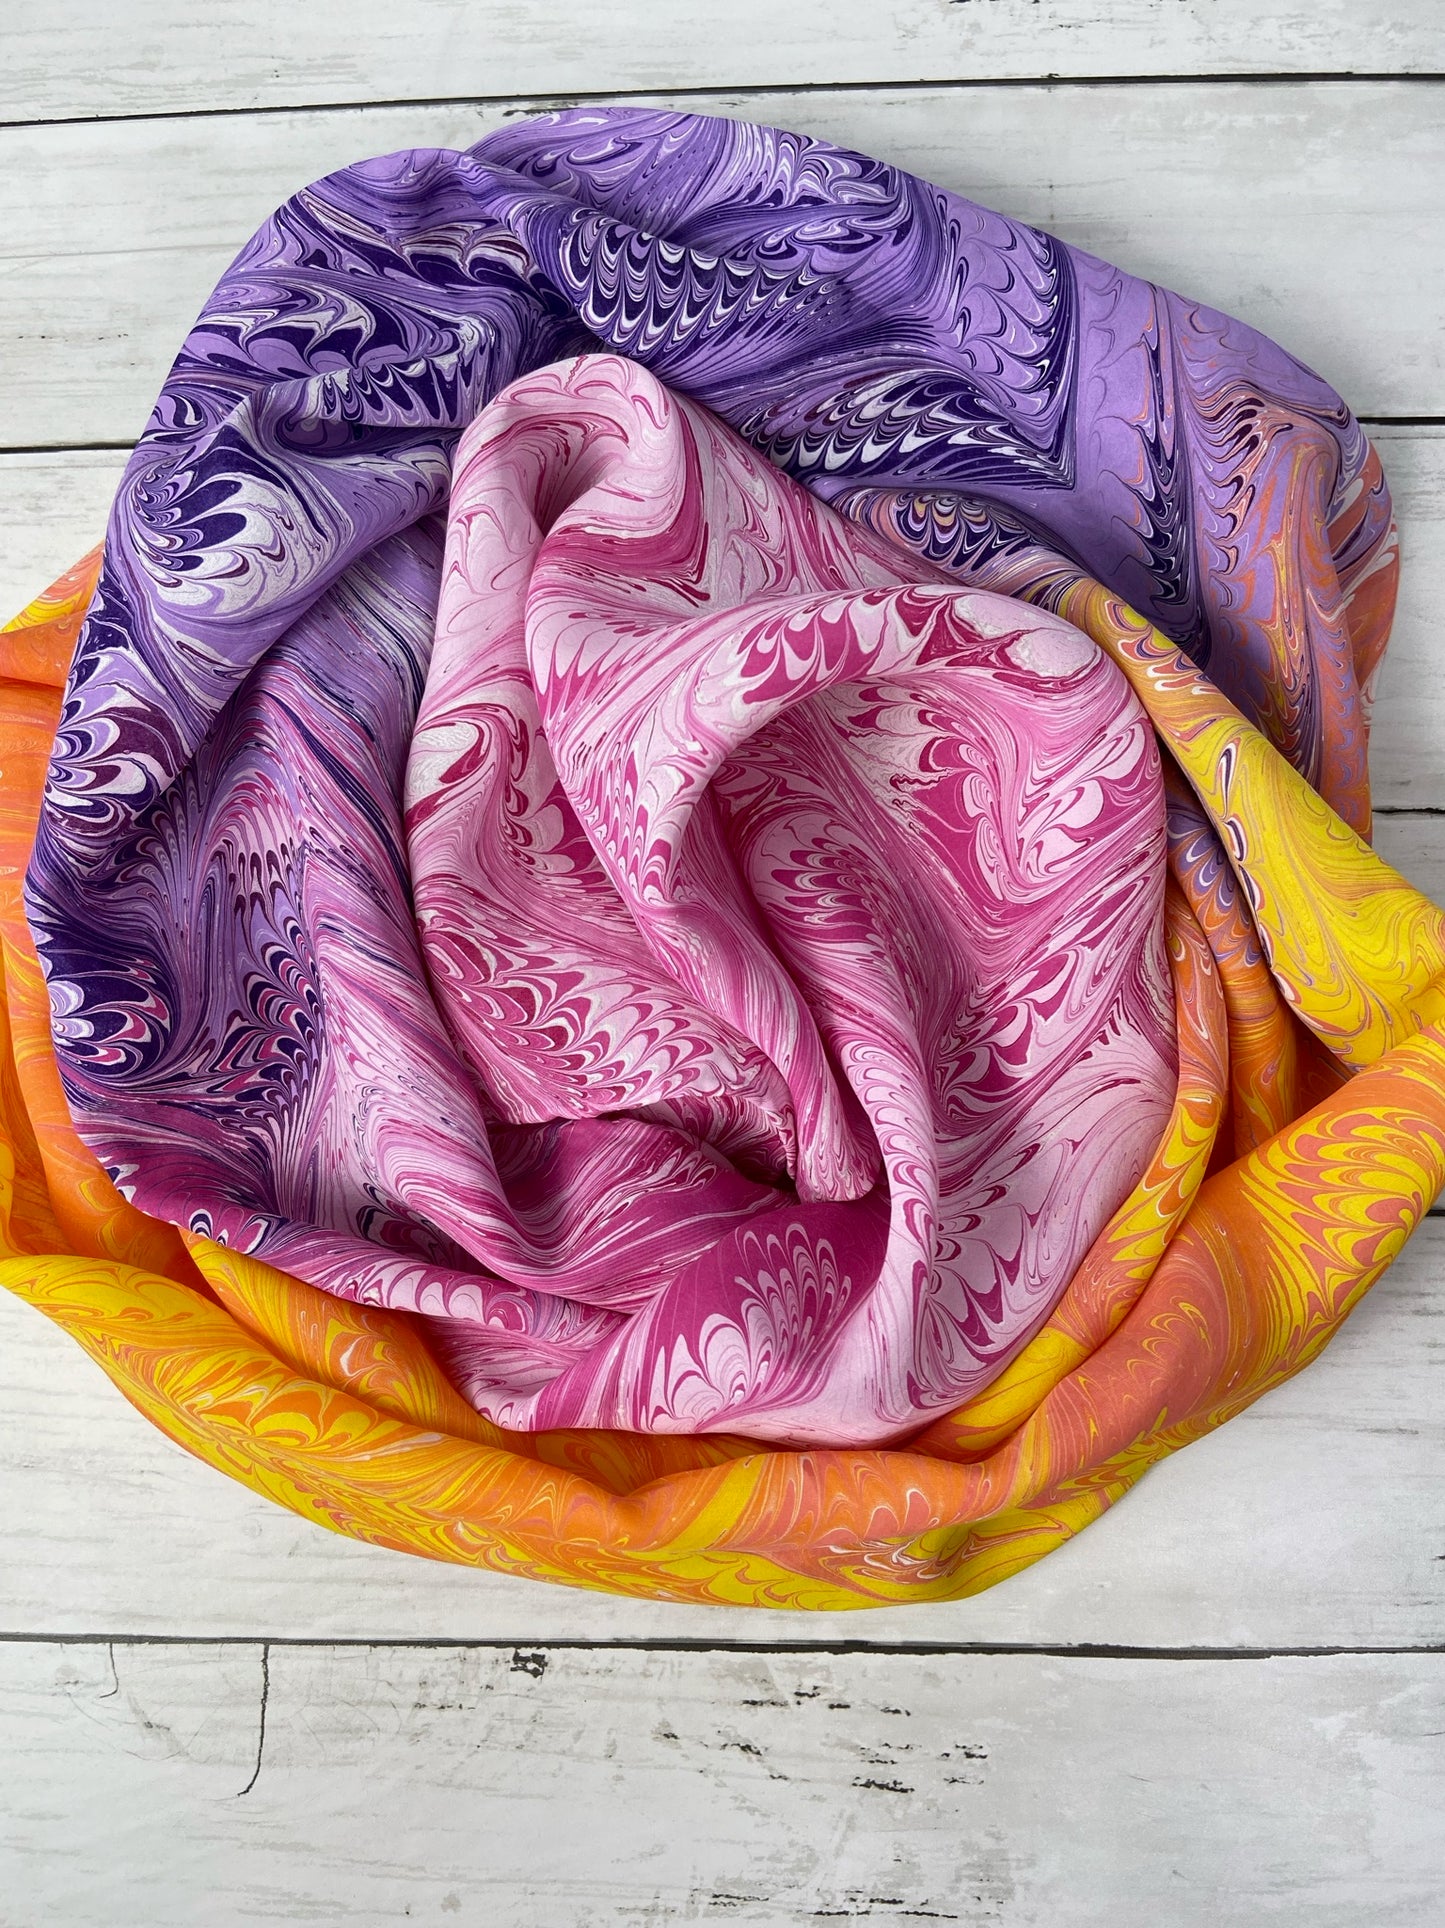 Pink, Coral, Yellow, Purple and White Silk Scarf "Dawn"